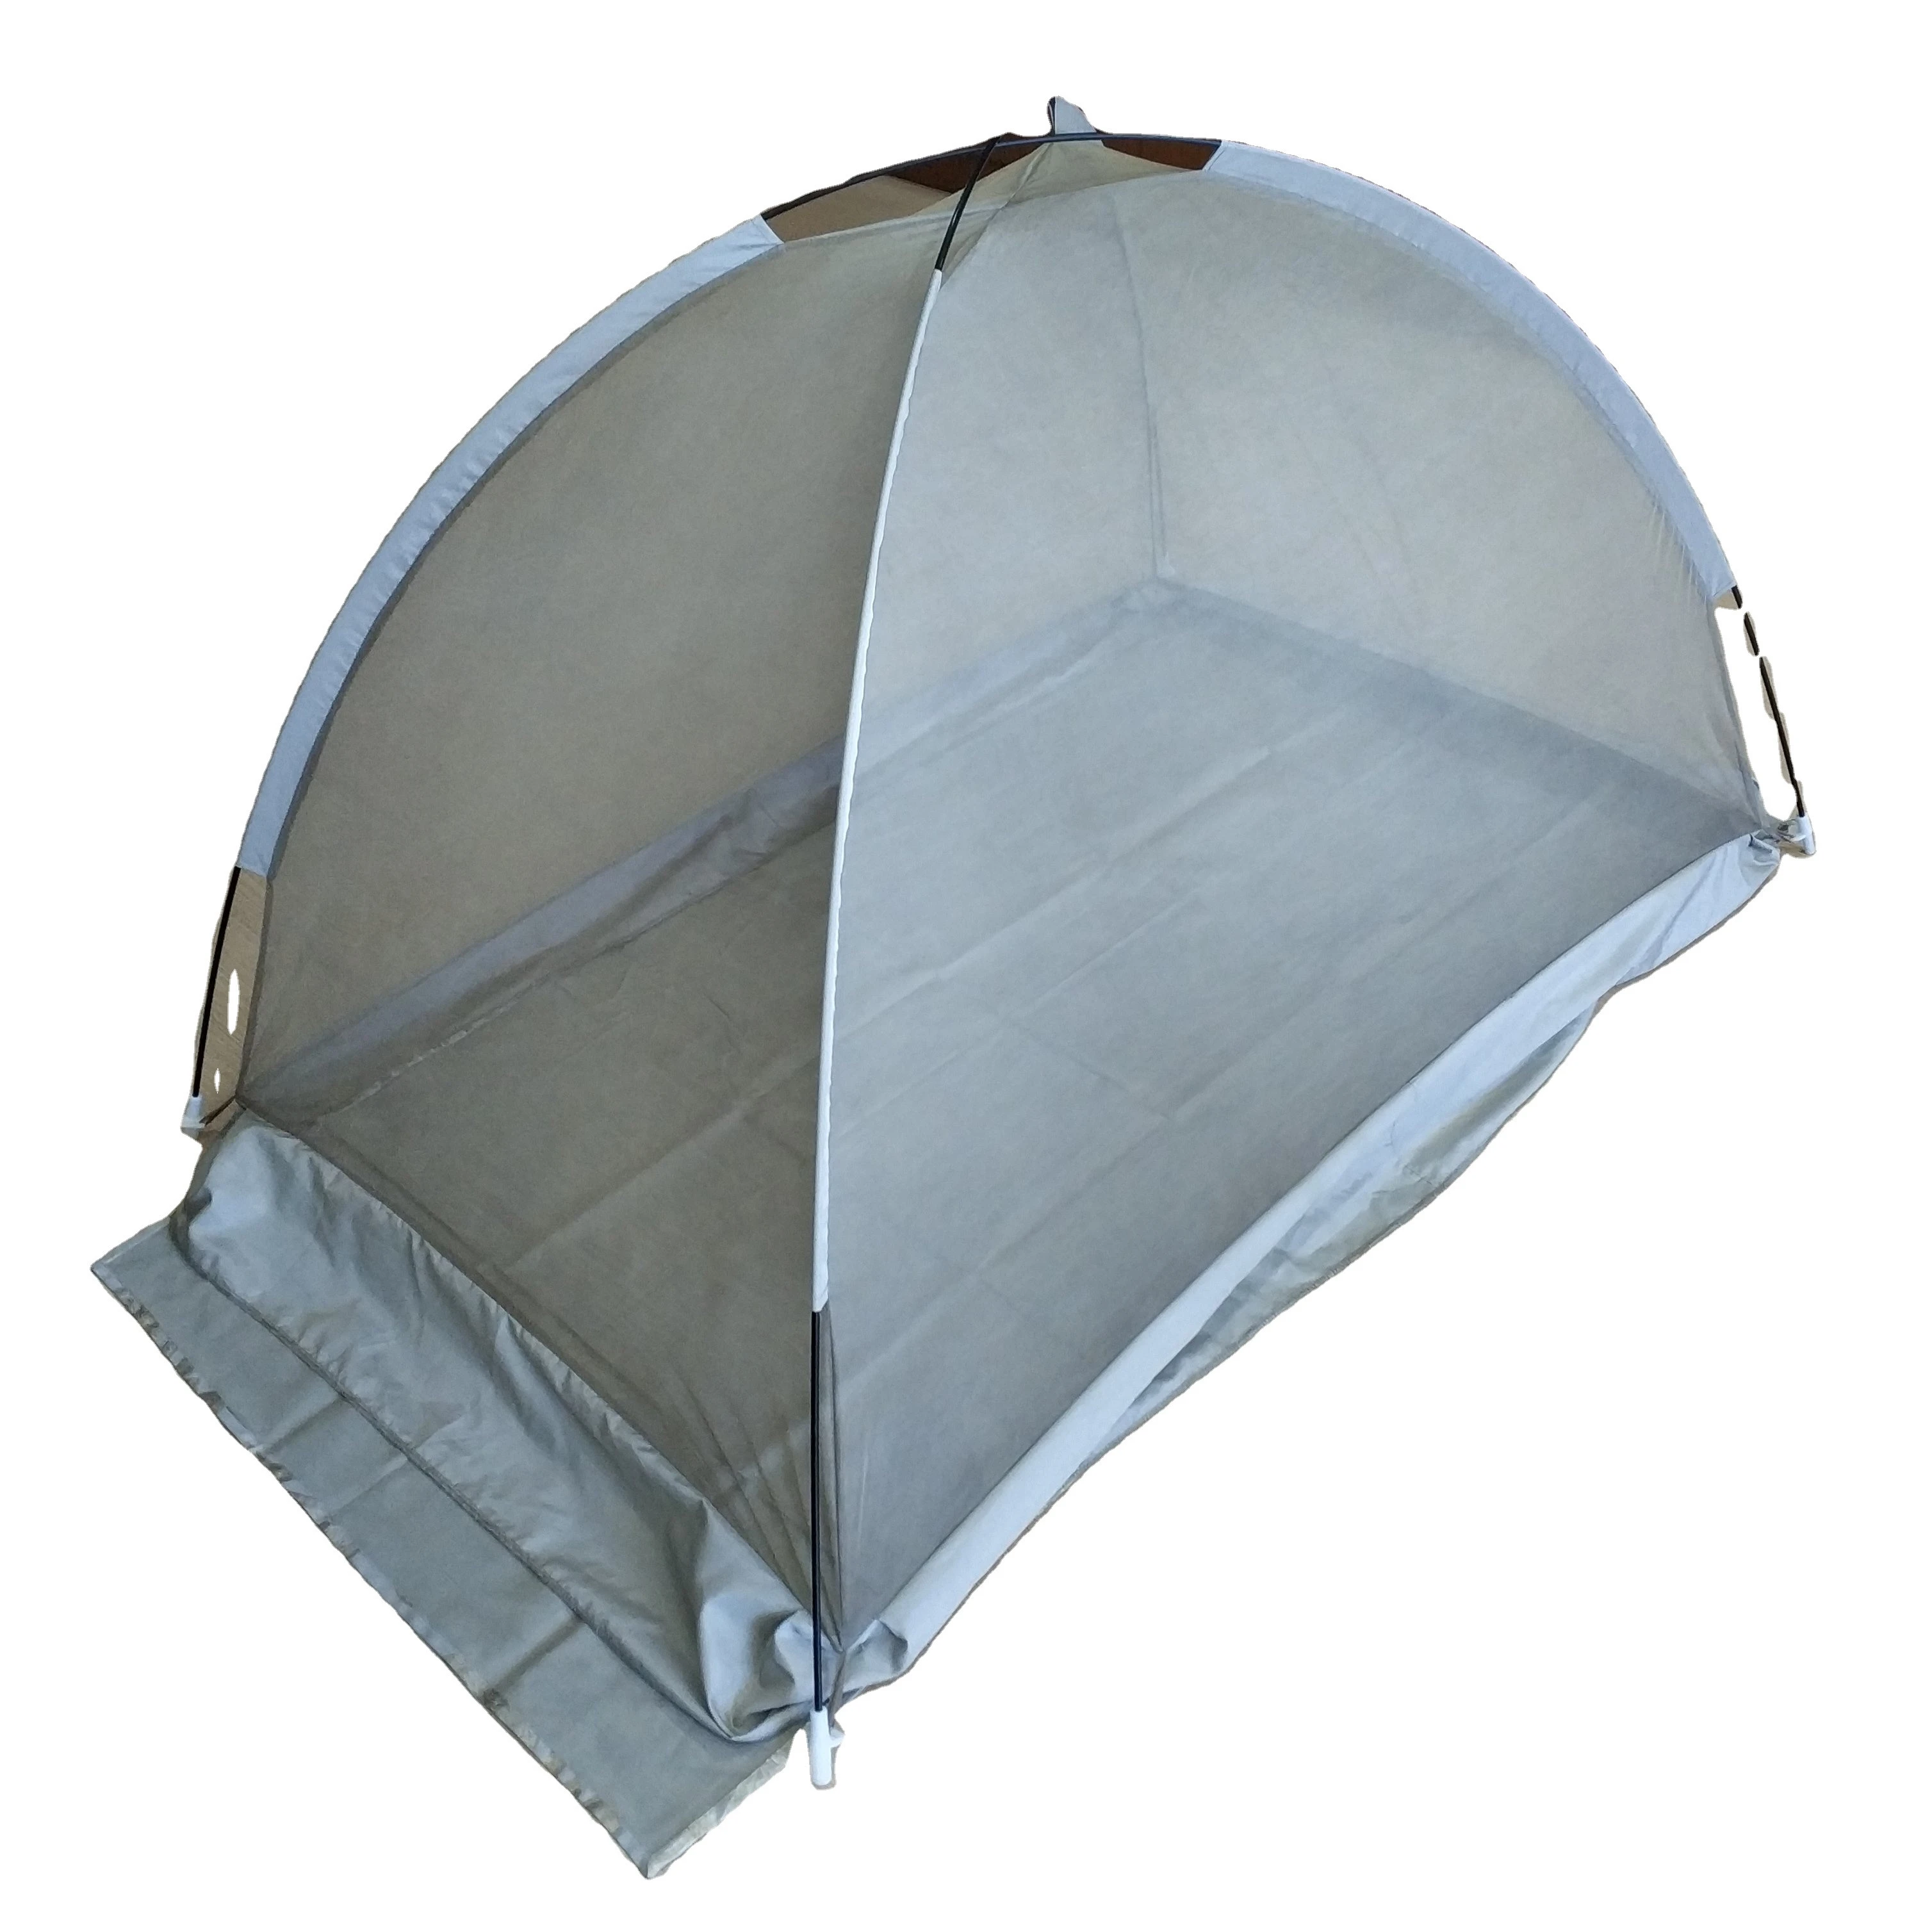 Urgarding Folded Mosquito Net and baby mosquito net with Anti radiation mesh, anti radiation tent and baby emf shielding canopy